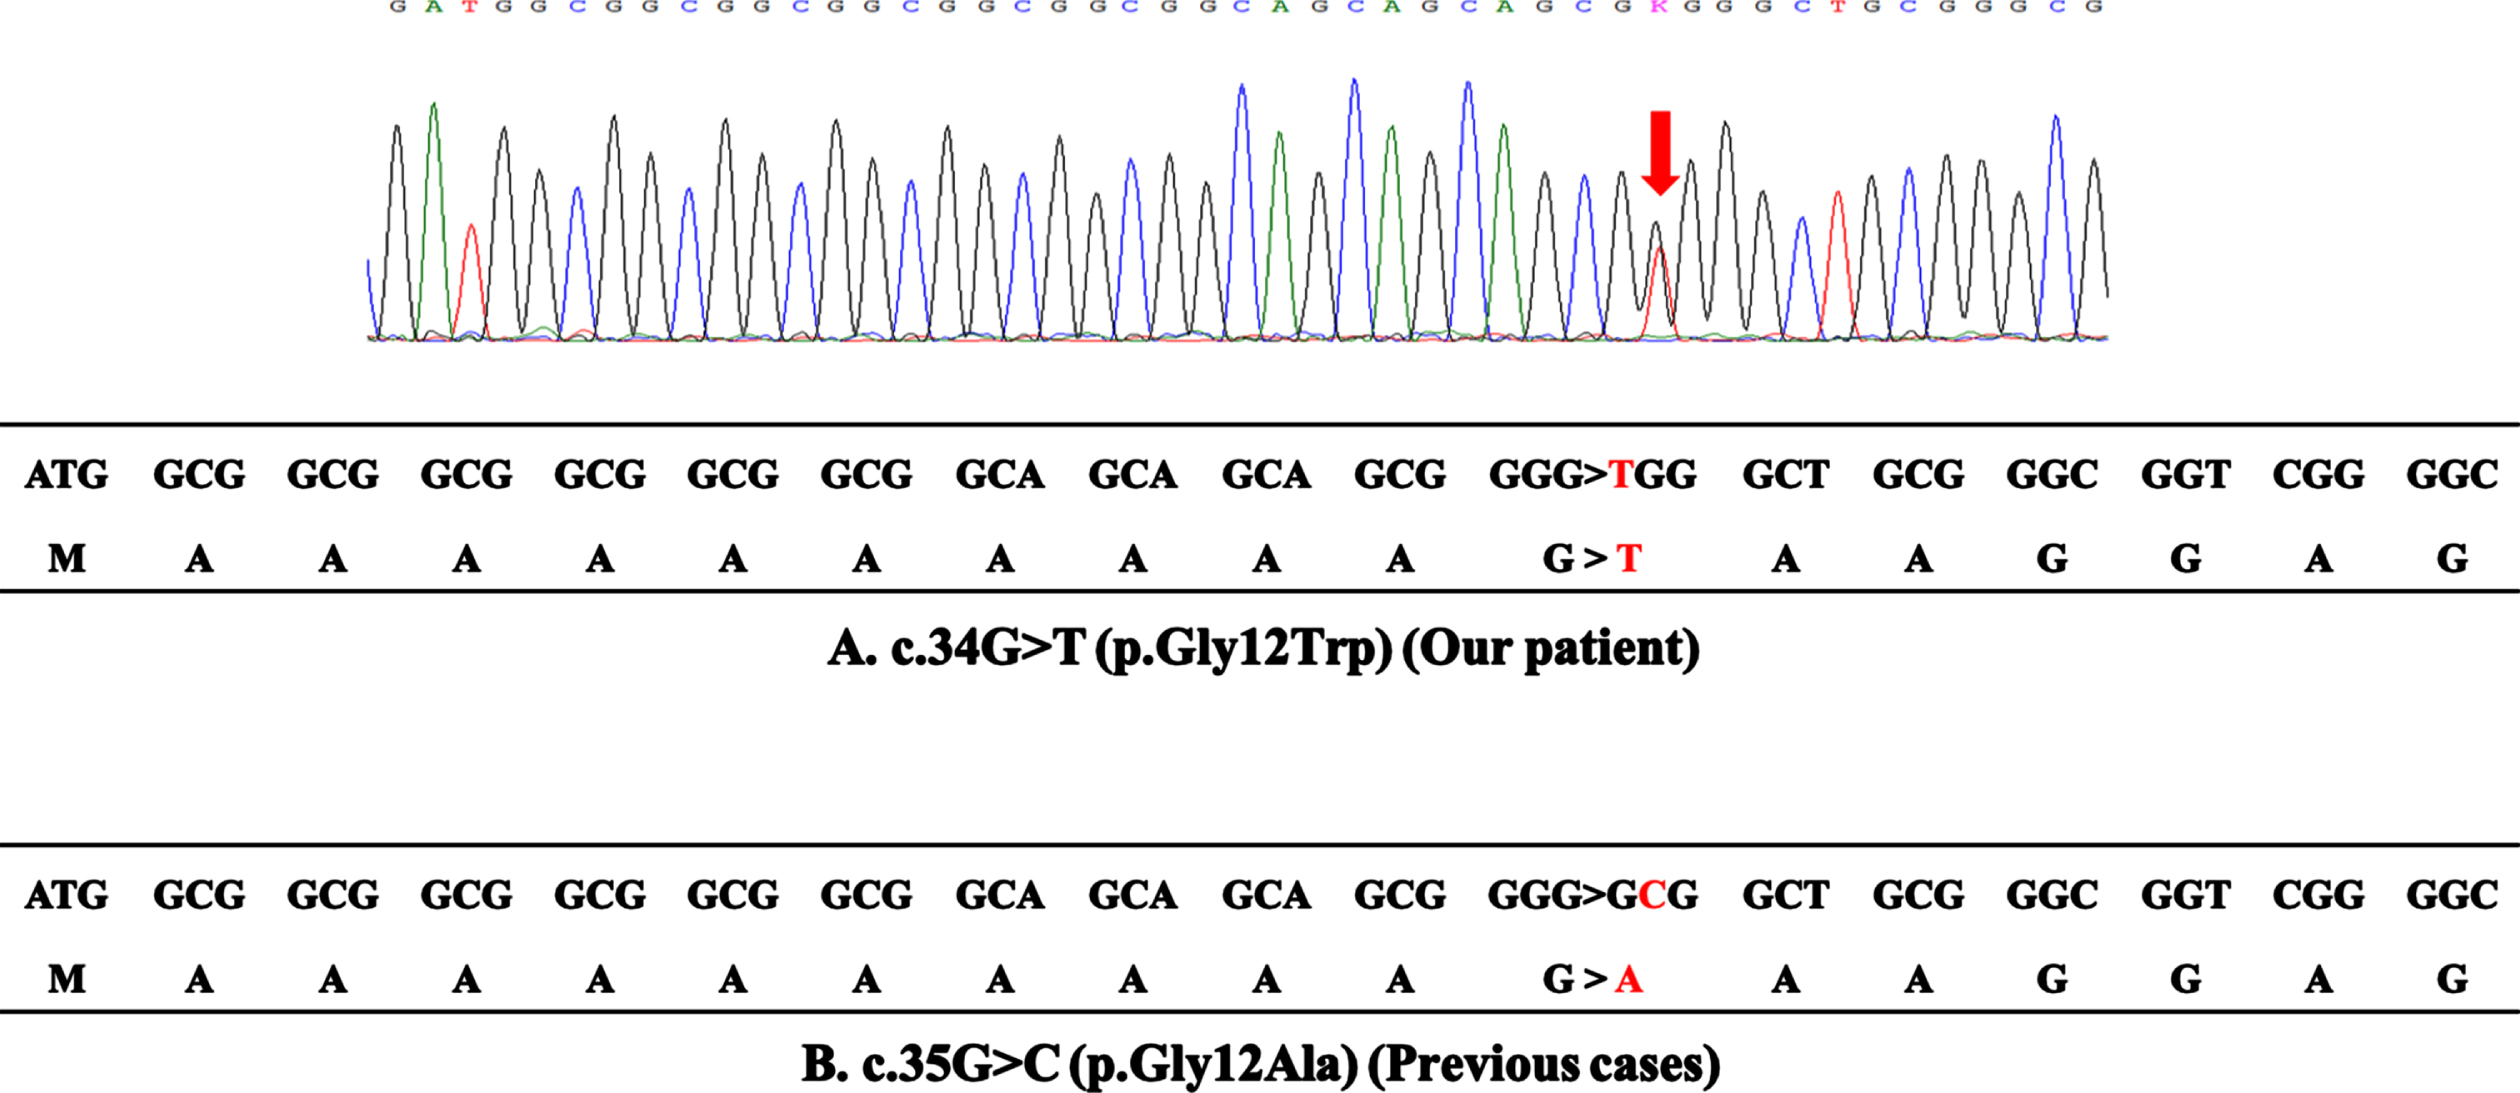 DNA sequence analysis. (A) The upper panel reports the sequence trace of the patient, indicating the position of the c.34G > T base change (arrow). The lower panel reports the coding sequence of the first 18 codons in exon 1 of the PABPN1 gene of the patient. The c.34G > T mutation results in the substitution of glycine by tryptophan at codon 12, which does not cause expansion of polyalanine stretch. (B) The coding sequence of the 4 reported cases with the c.35G > C mutation. The c.35G > C mutation results in the substitution of glycine by alanine at codon 12, which generates a sequence of 13 contiguous alanines.